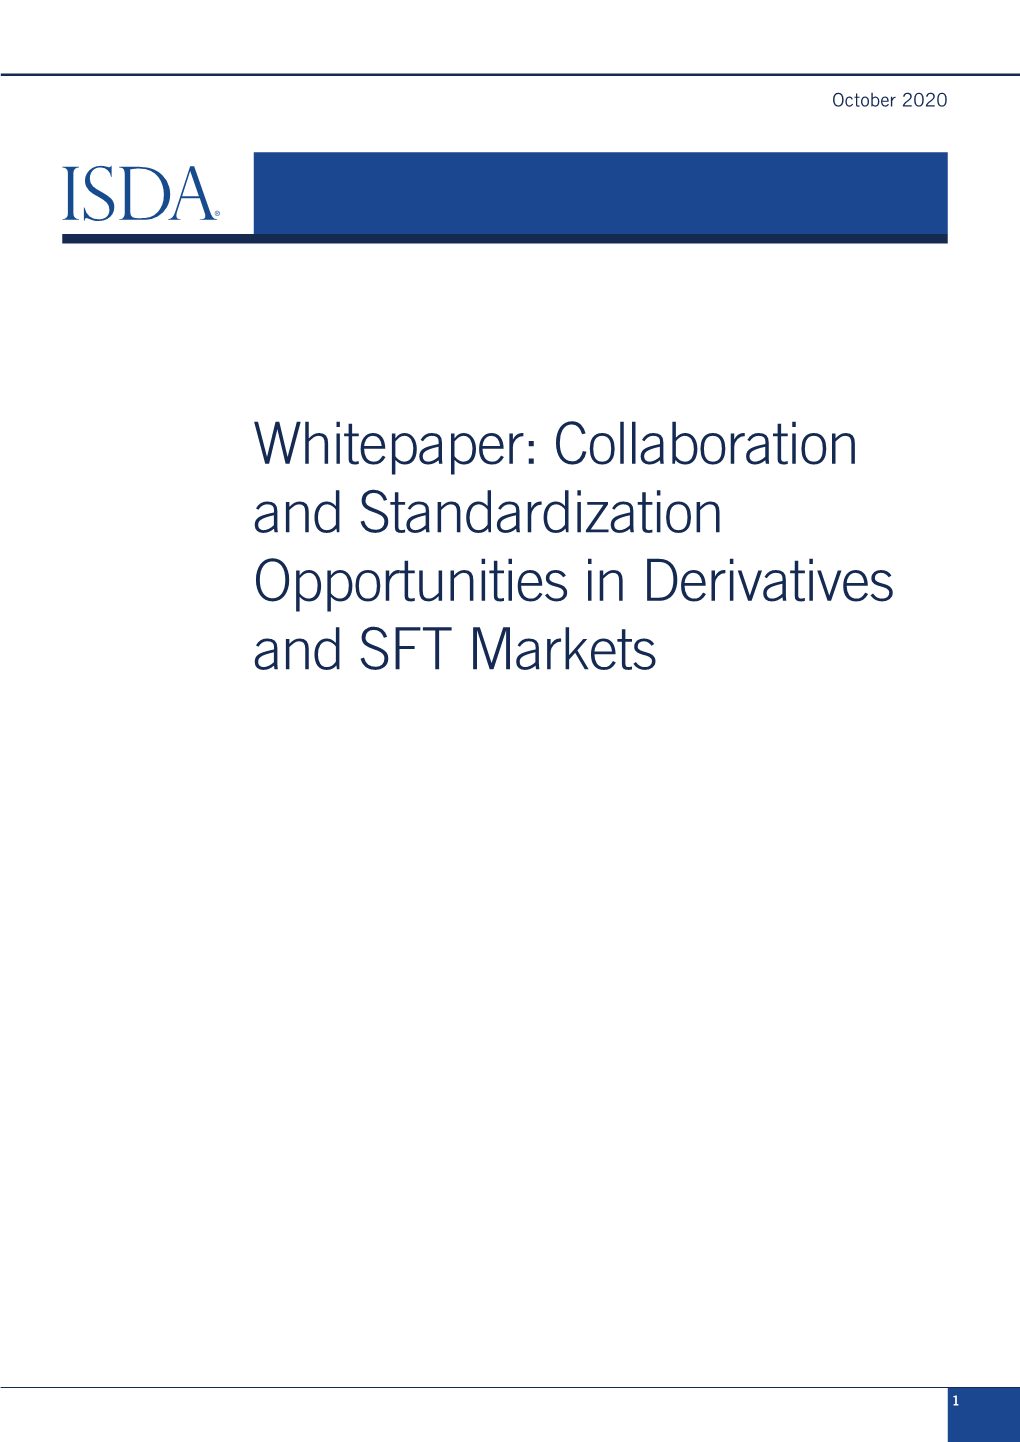 Whitepaper: Collaboration and Standardization Opportunities in Derivatives and SFT Markets